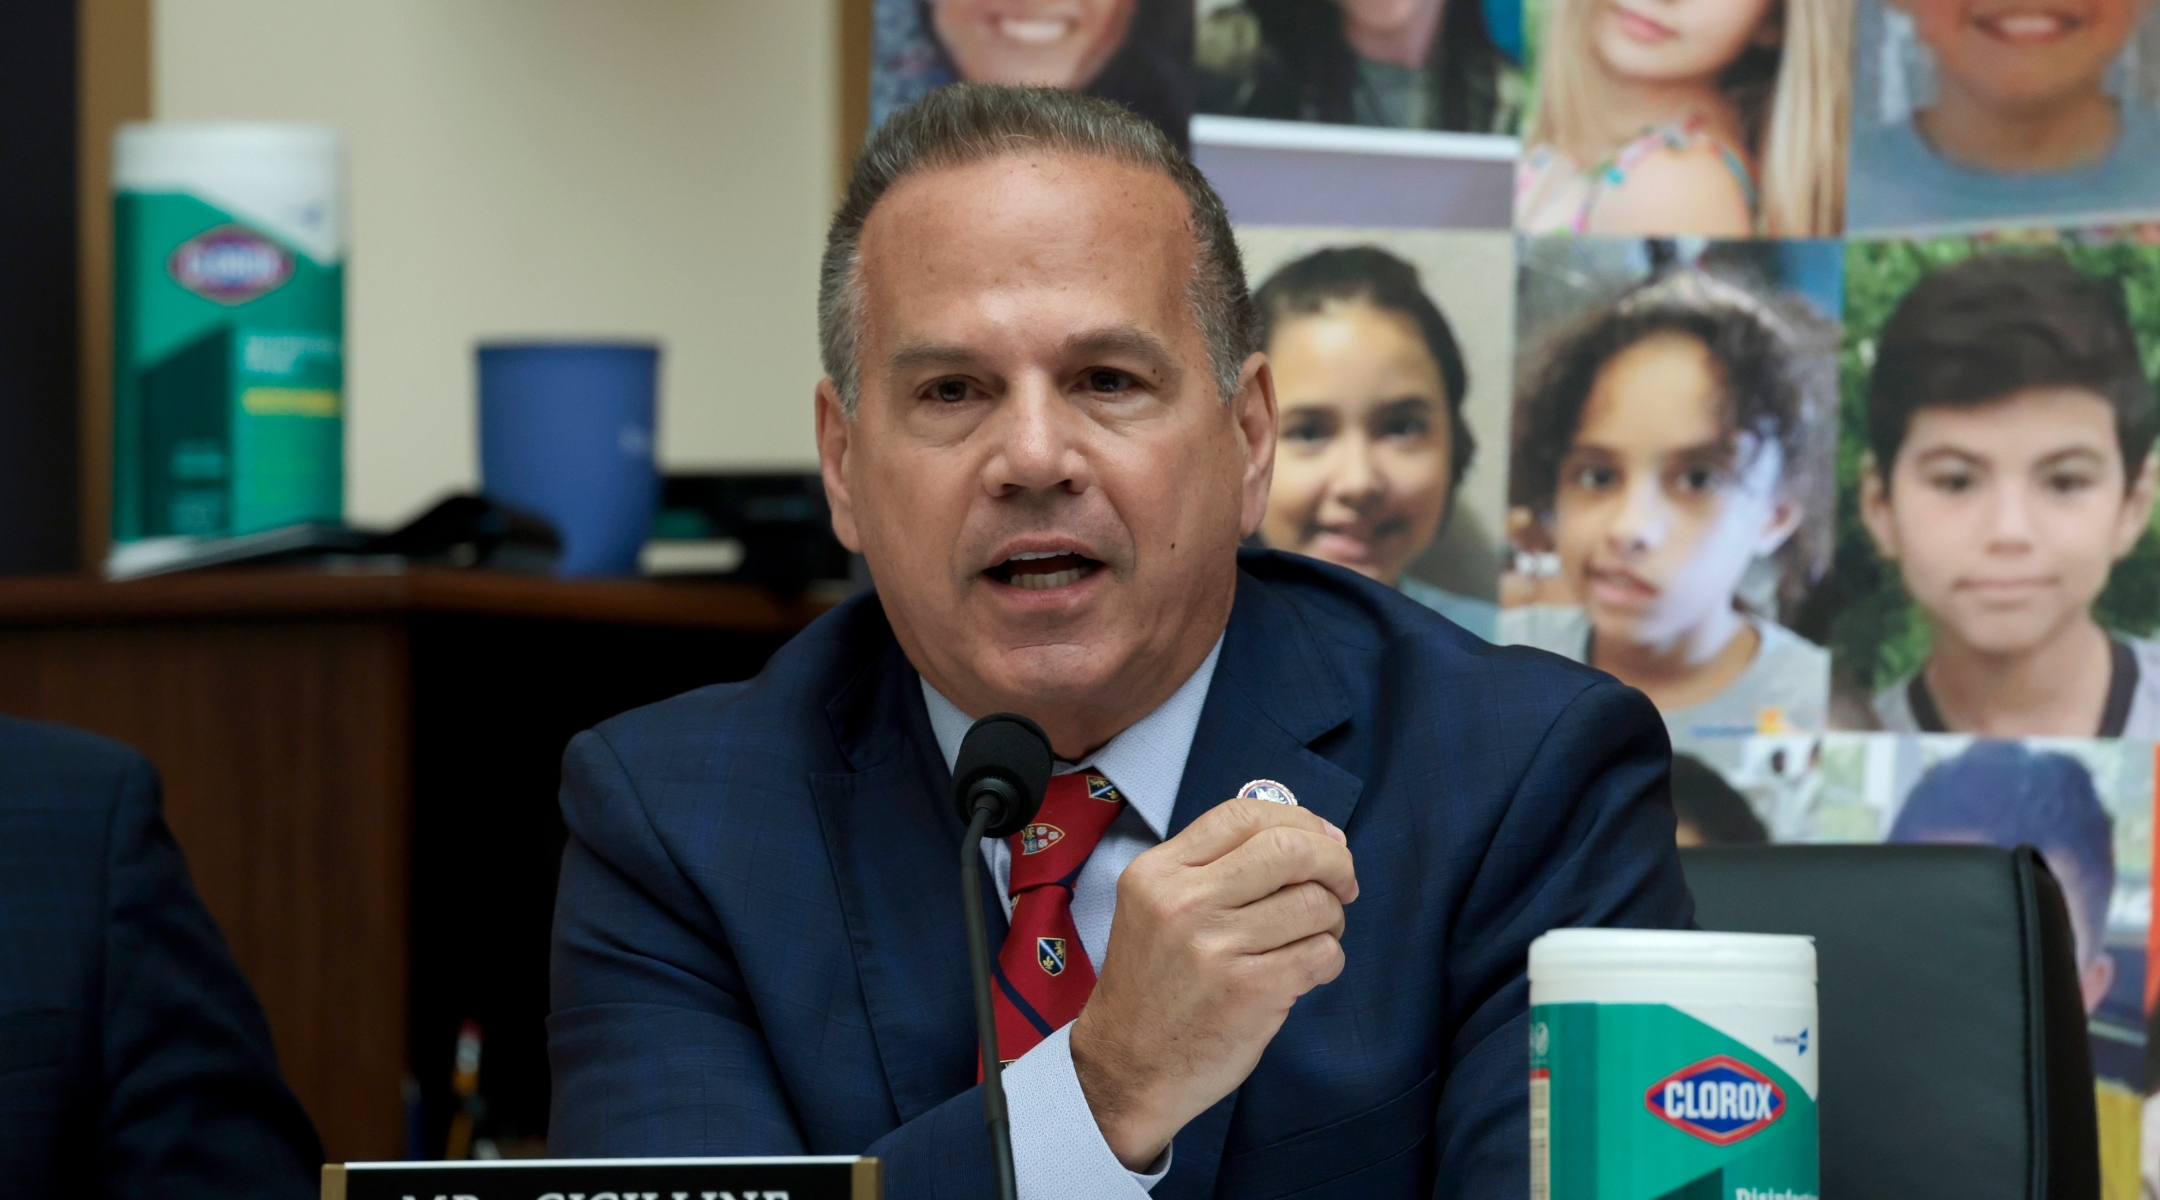 David Cicilline, Jewish progressive, is new chair of House Middle East subcommittee